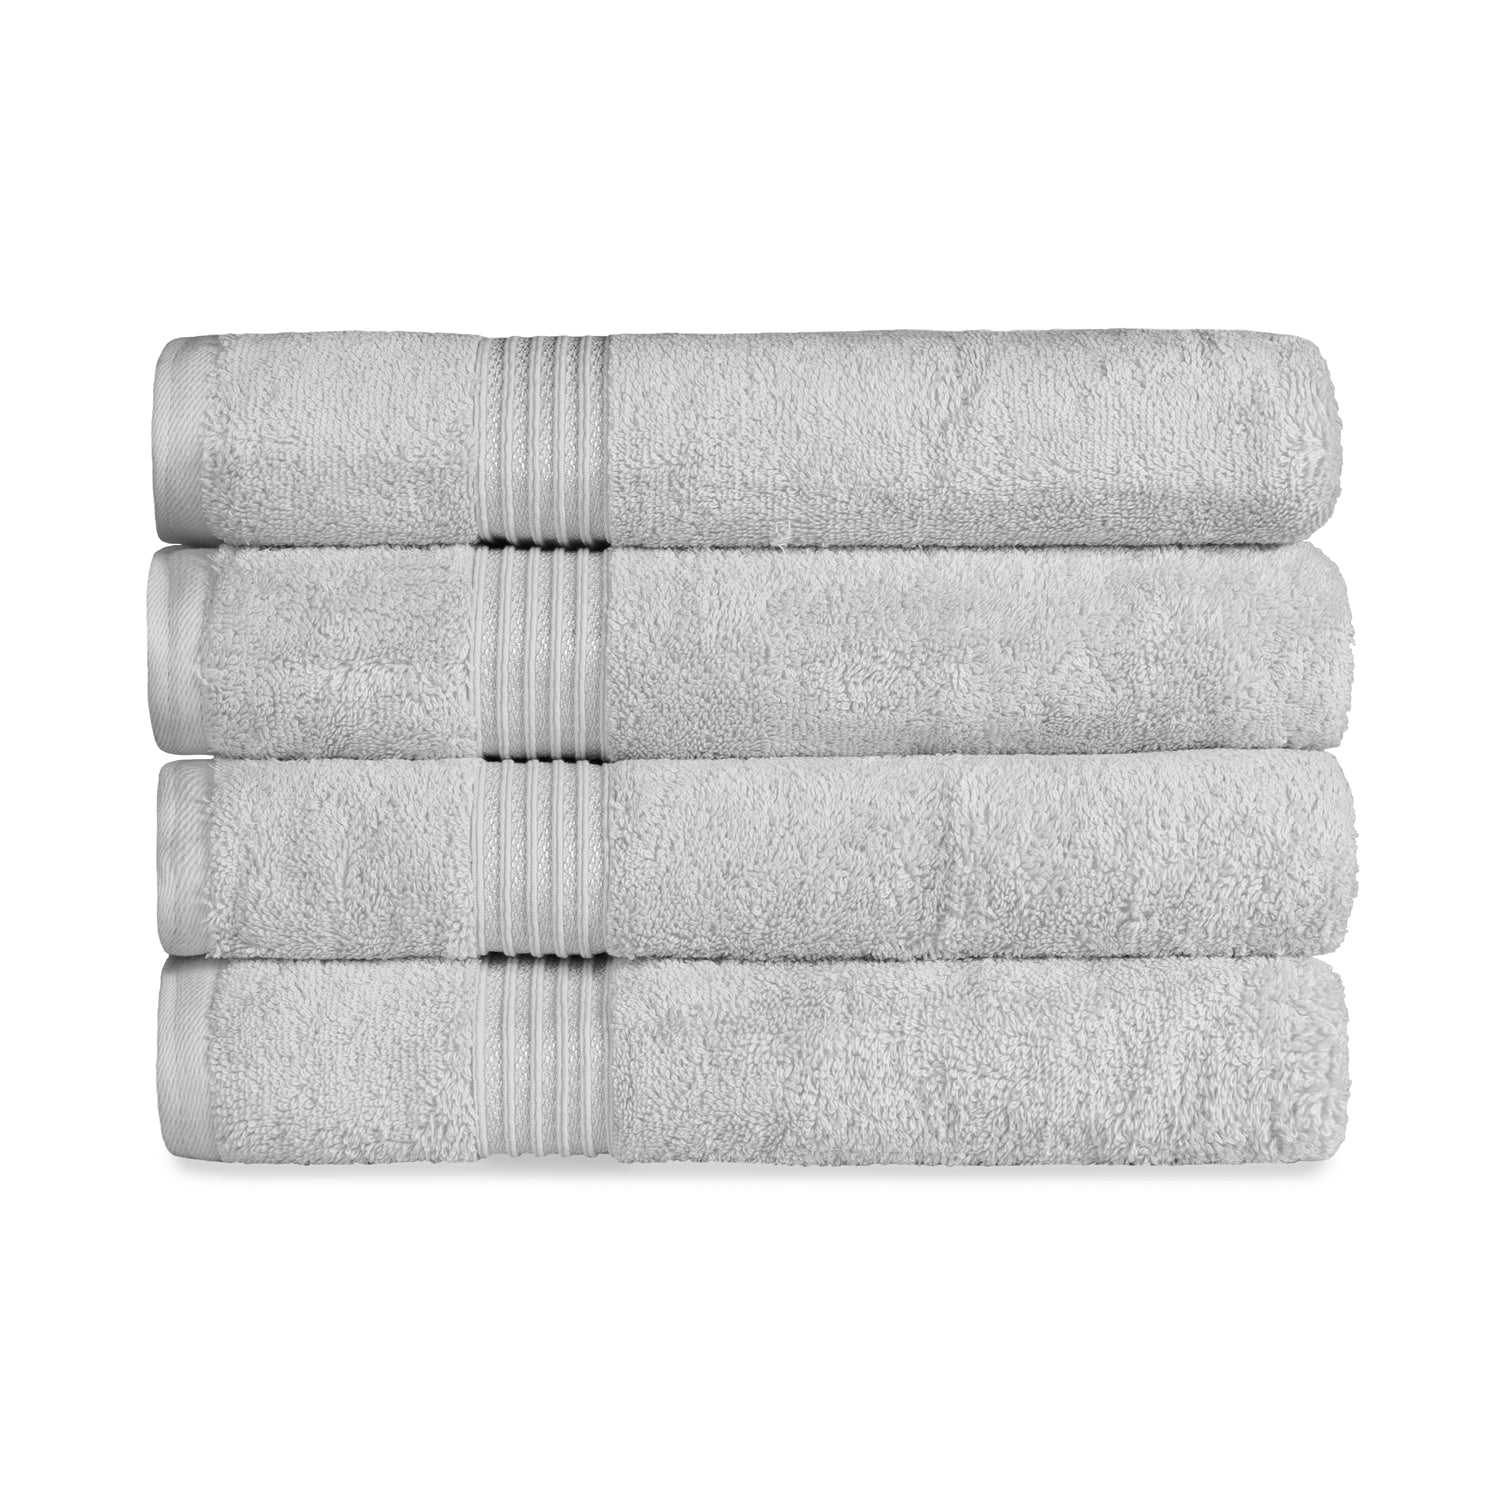 Egyptian Cotton Highly Absorbent Solid 4-Piece Ultra Soft Bath Towel Set - Silver